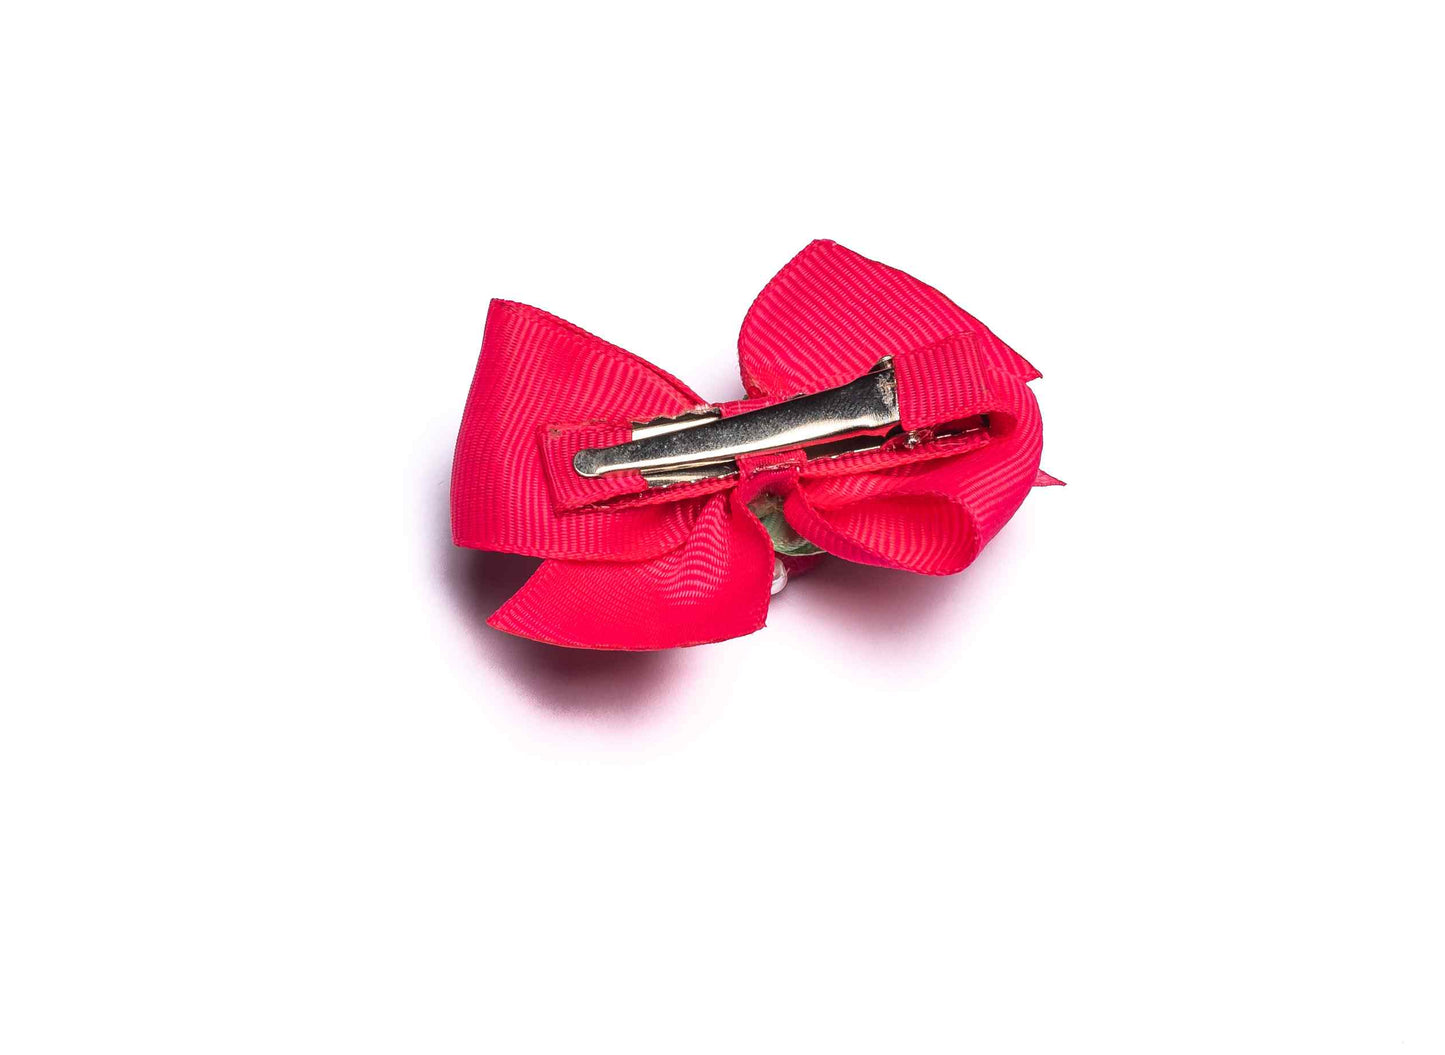 Dual bow with felt roses and pearls on Alligator pin